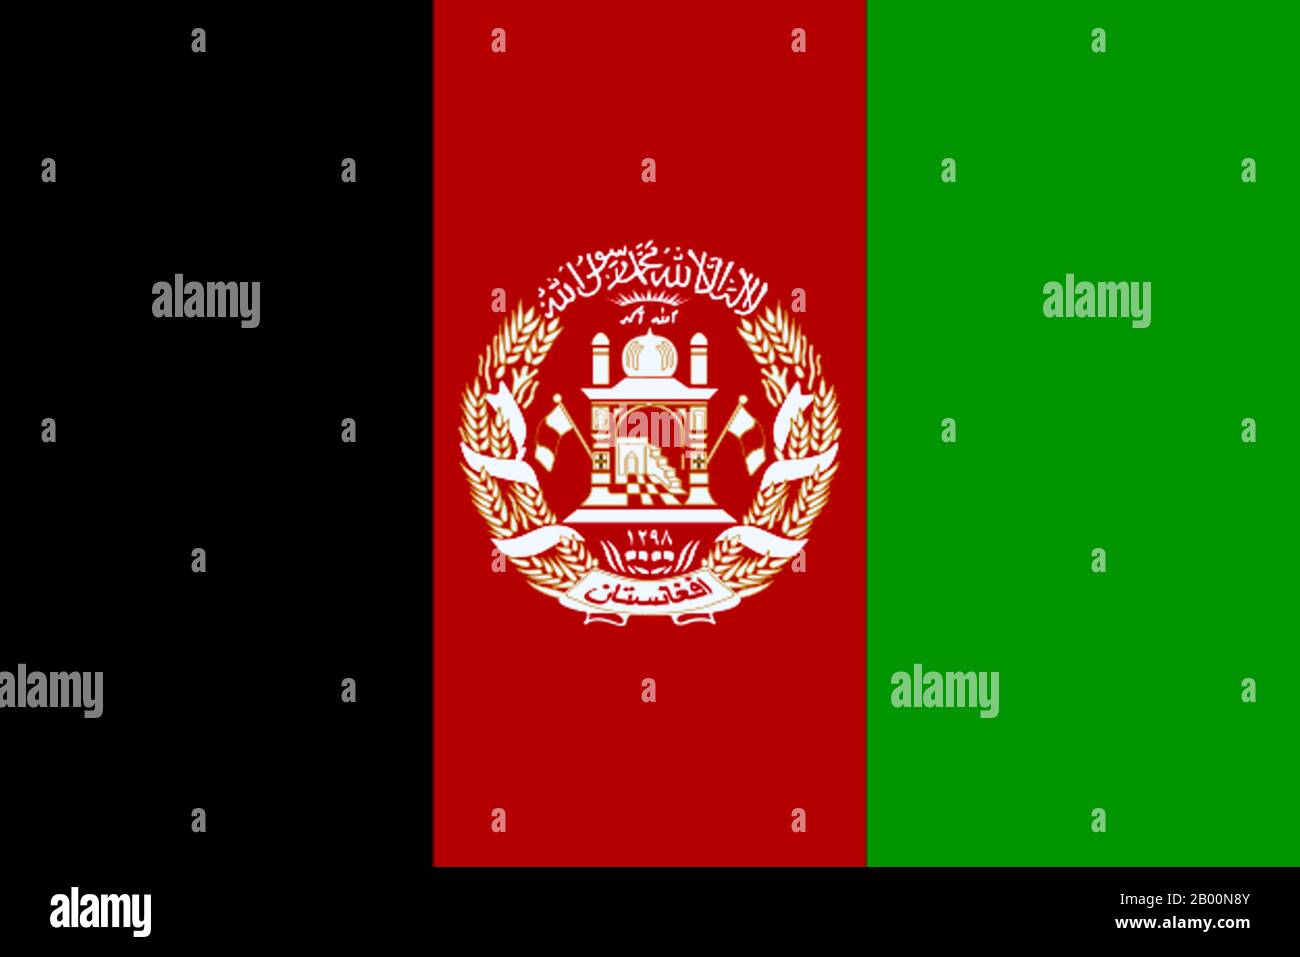 Afghanistan: National Flag of the Islamic Republic of Afghanistan from 2004.  The flag of Afghanistan was adopted by the transitional government of the Transitional Islamic State of Afghanistan in 2002–2004. This flag is similar to the one flown in Afghanistan during the monarchy between 1930 and 1973. The difference is the addition of the shahadah (Islamic Confession of Faith) at the top of the coat of arms (seen in gold/yellow) in the center. The new flag was adopted January 4, 2004. The flag consists of three stripes of the colors black, red, and green. Stock Photo